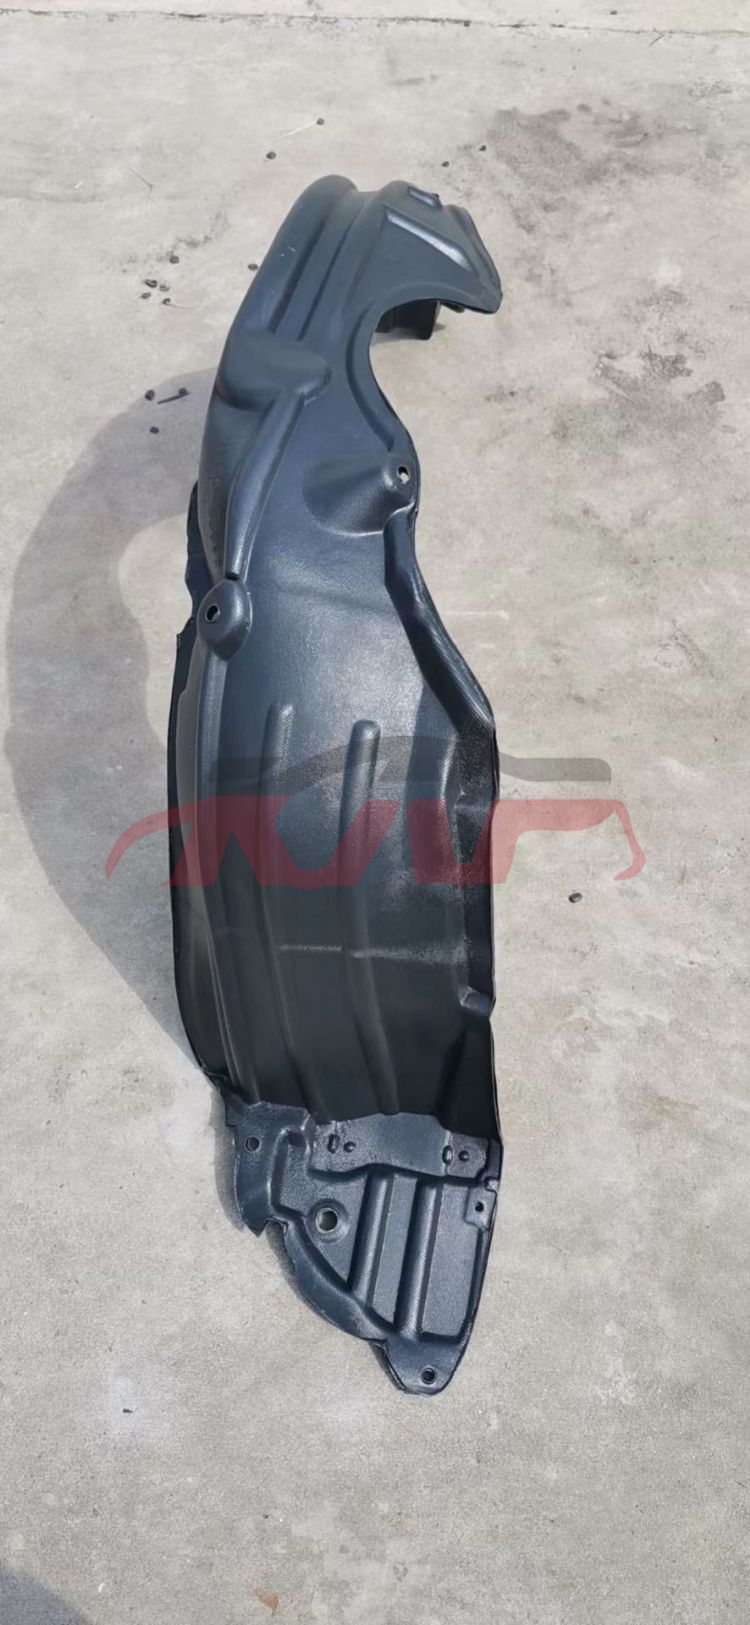 For Toyota 2022907 Yaris fender,china 53875-52140, Toyota  Wheel Well Liner, Yaris  Parts53875-52140